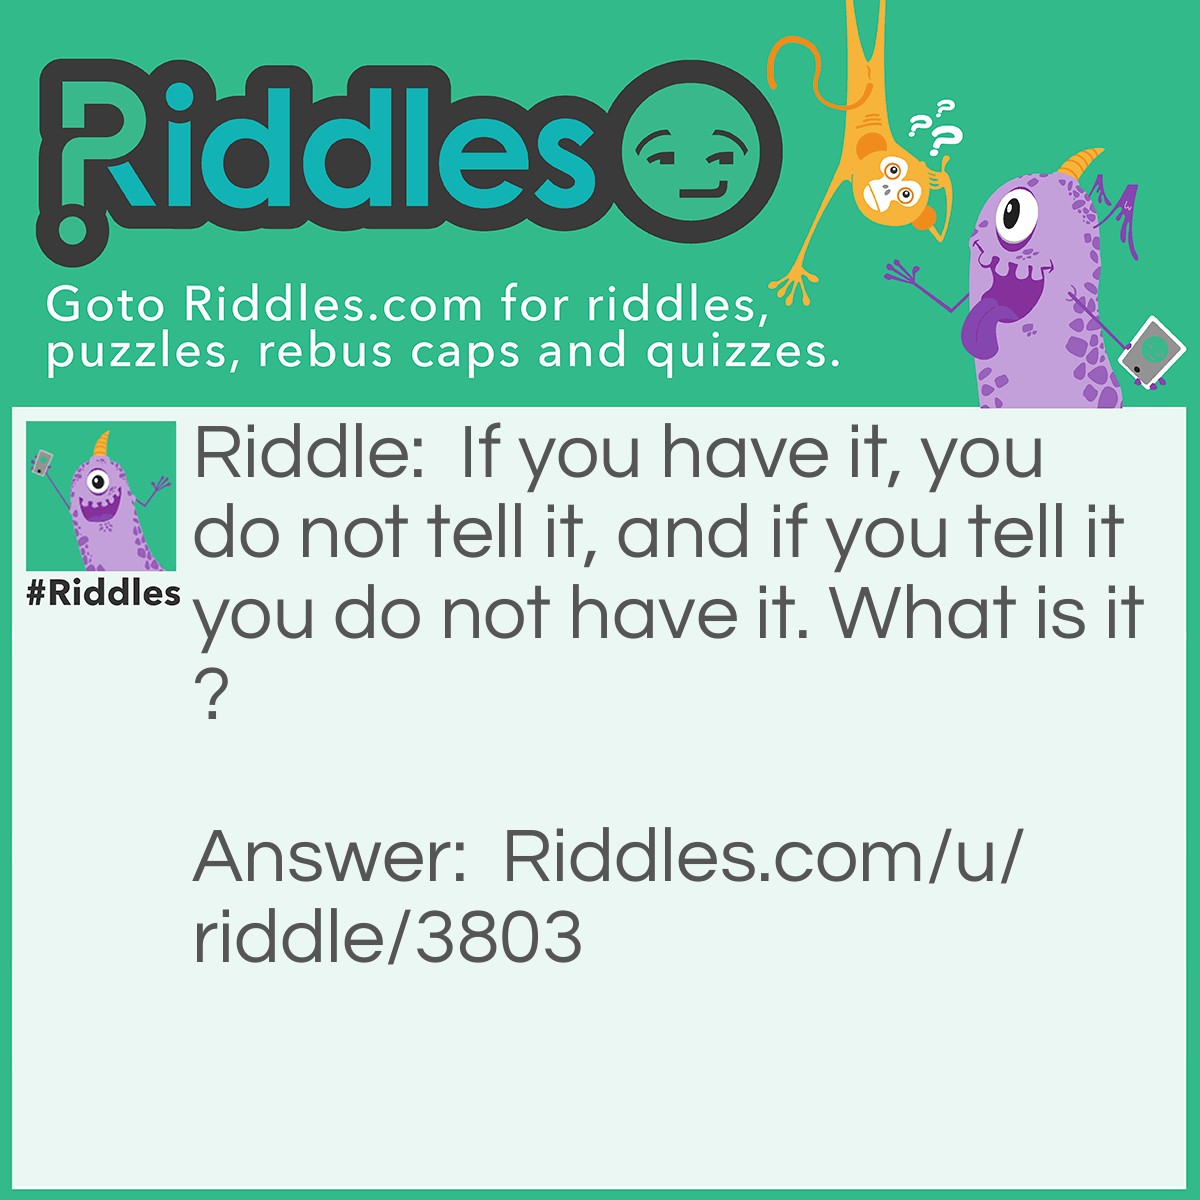 Riddle: If you have it, you do not tell it, and if you tell it you do not have it. What is it? Answer: A secret.